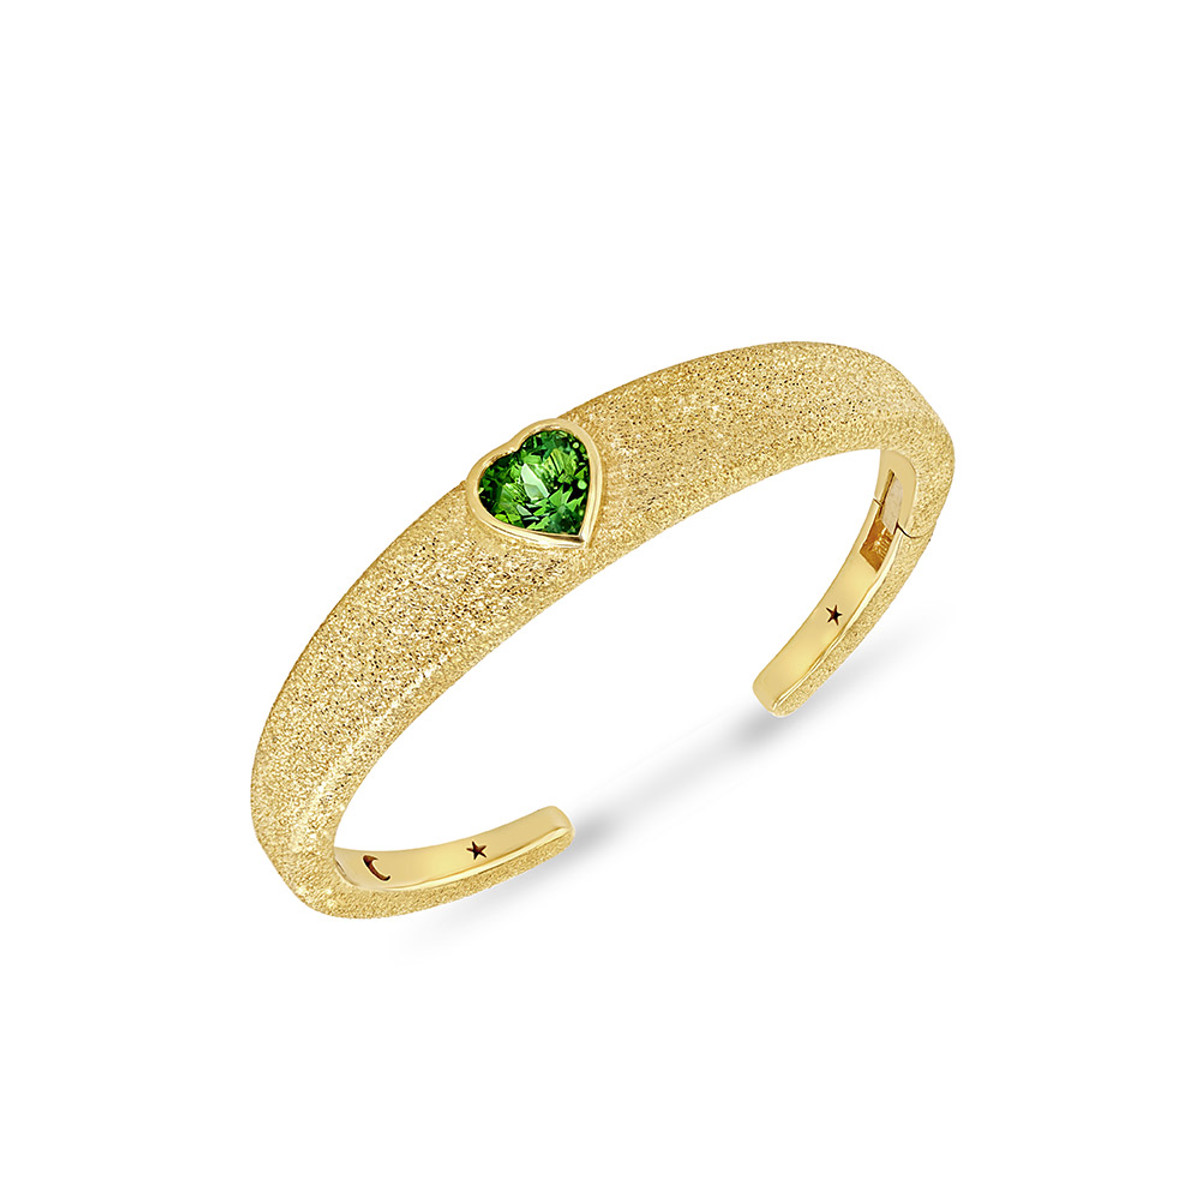 Future Fortune 18K Yellow Gold Magic Spell Green Tourmaline Bracelet-55976 Product Image